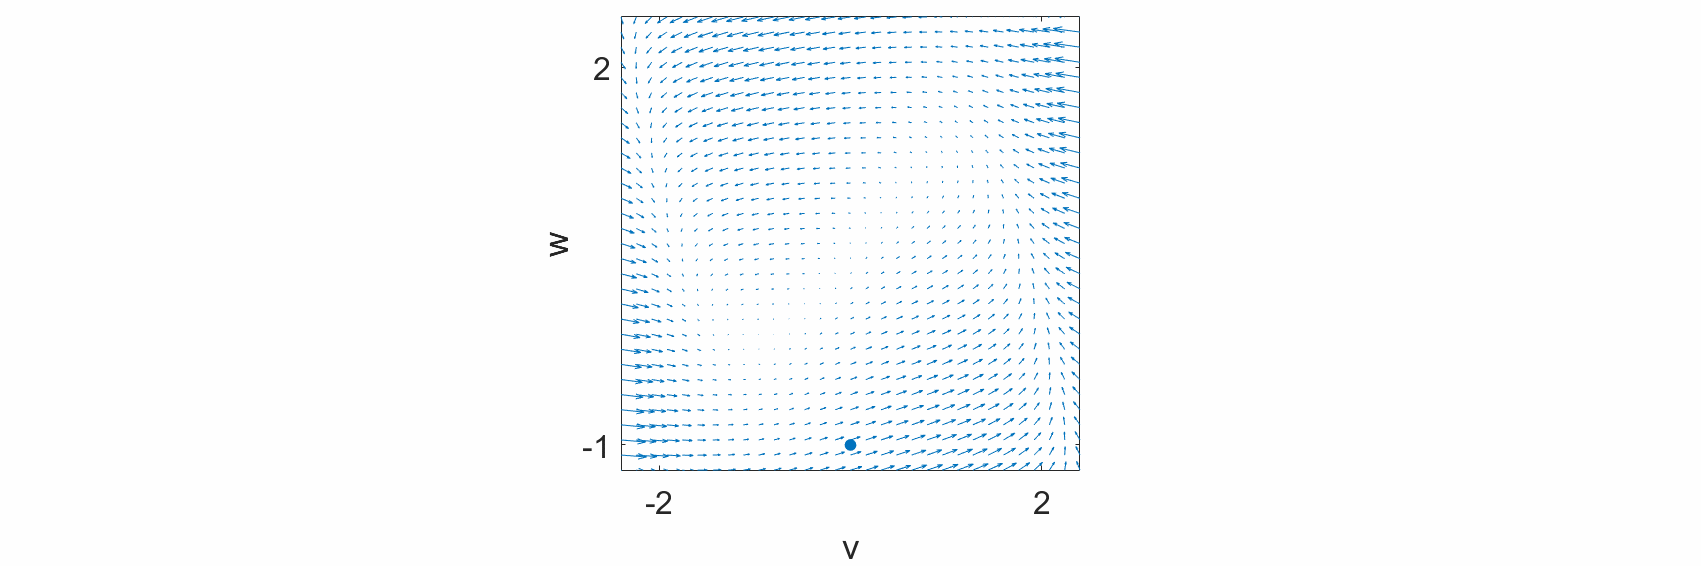 ../../_images/fig_vector_field.gif